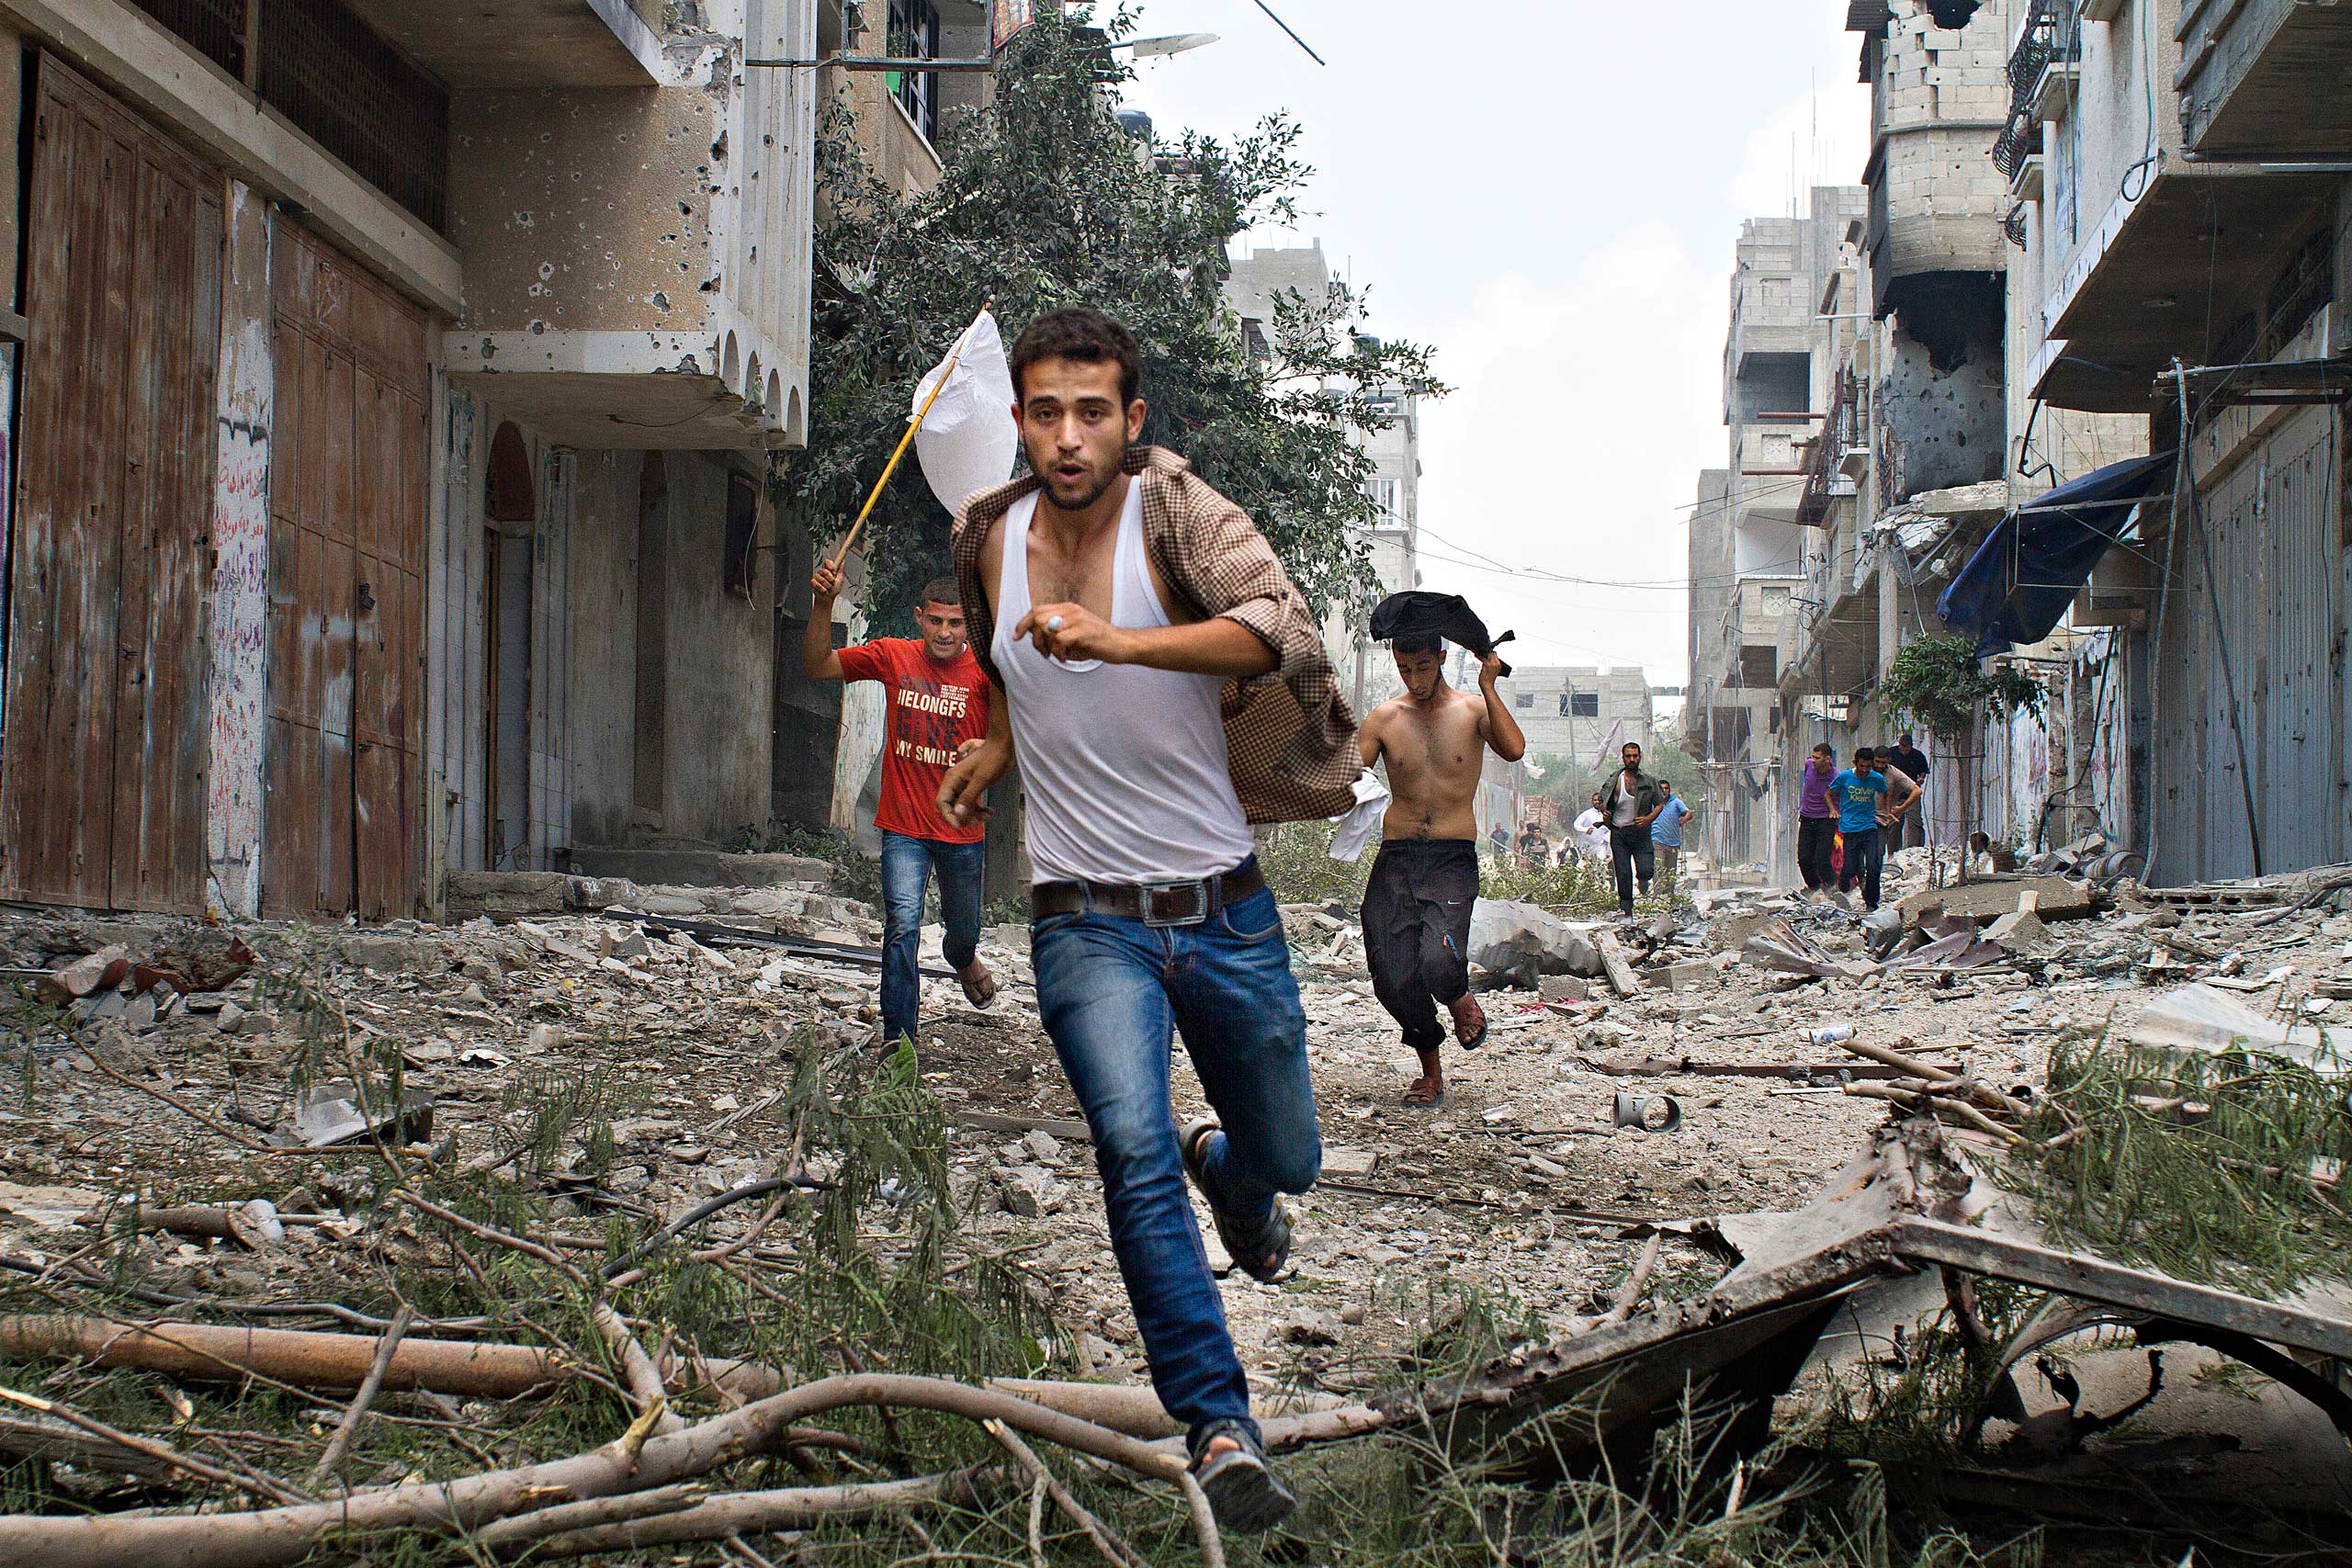 Palestinian men run with a white flag in the Shejaia neighborhood, which was heavily shelled by Israel during fighting, in Gaza City July 20, 2014.